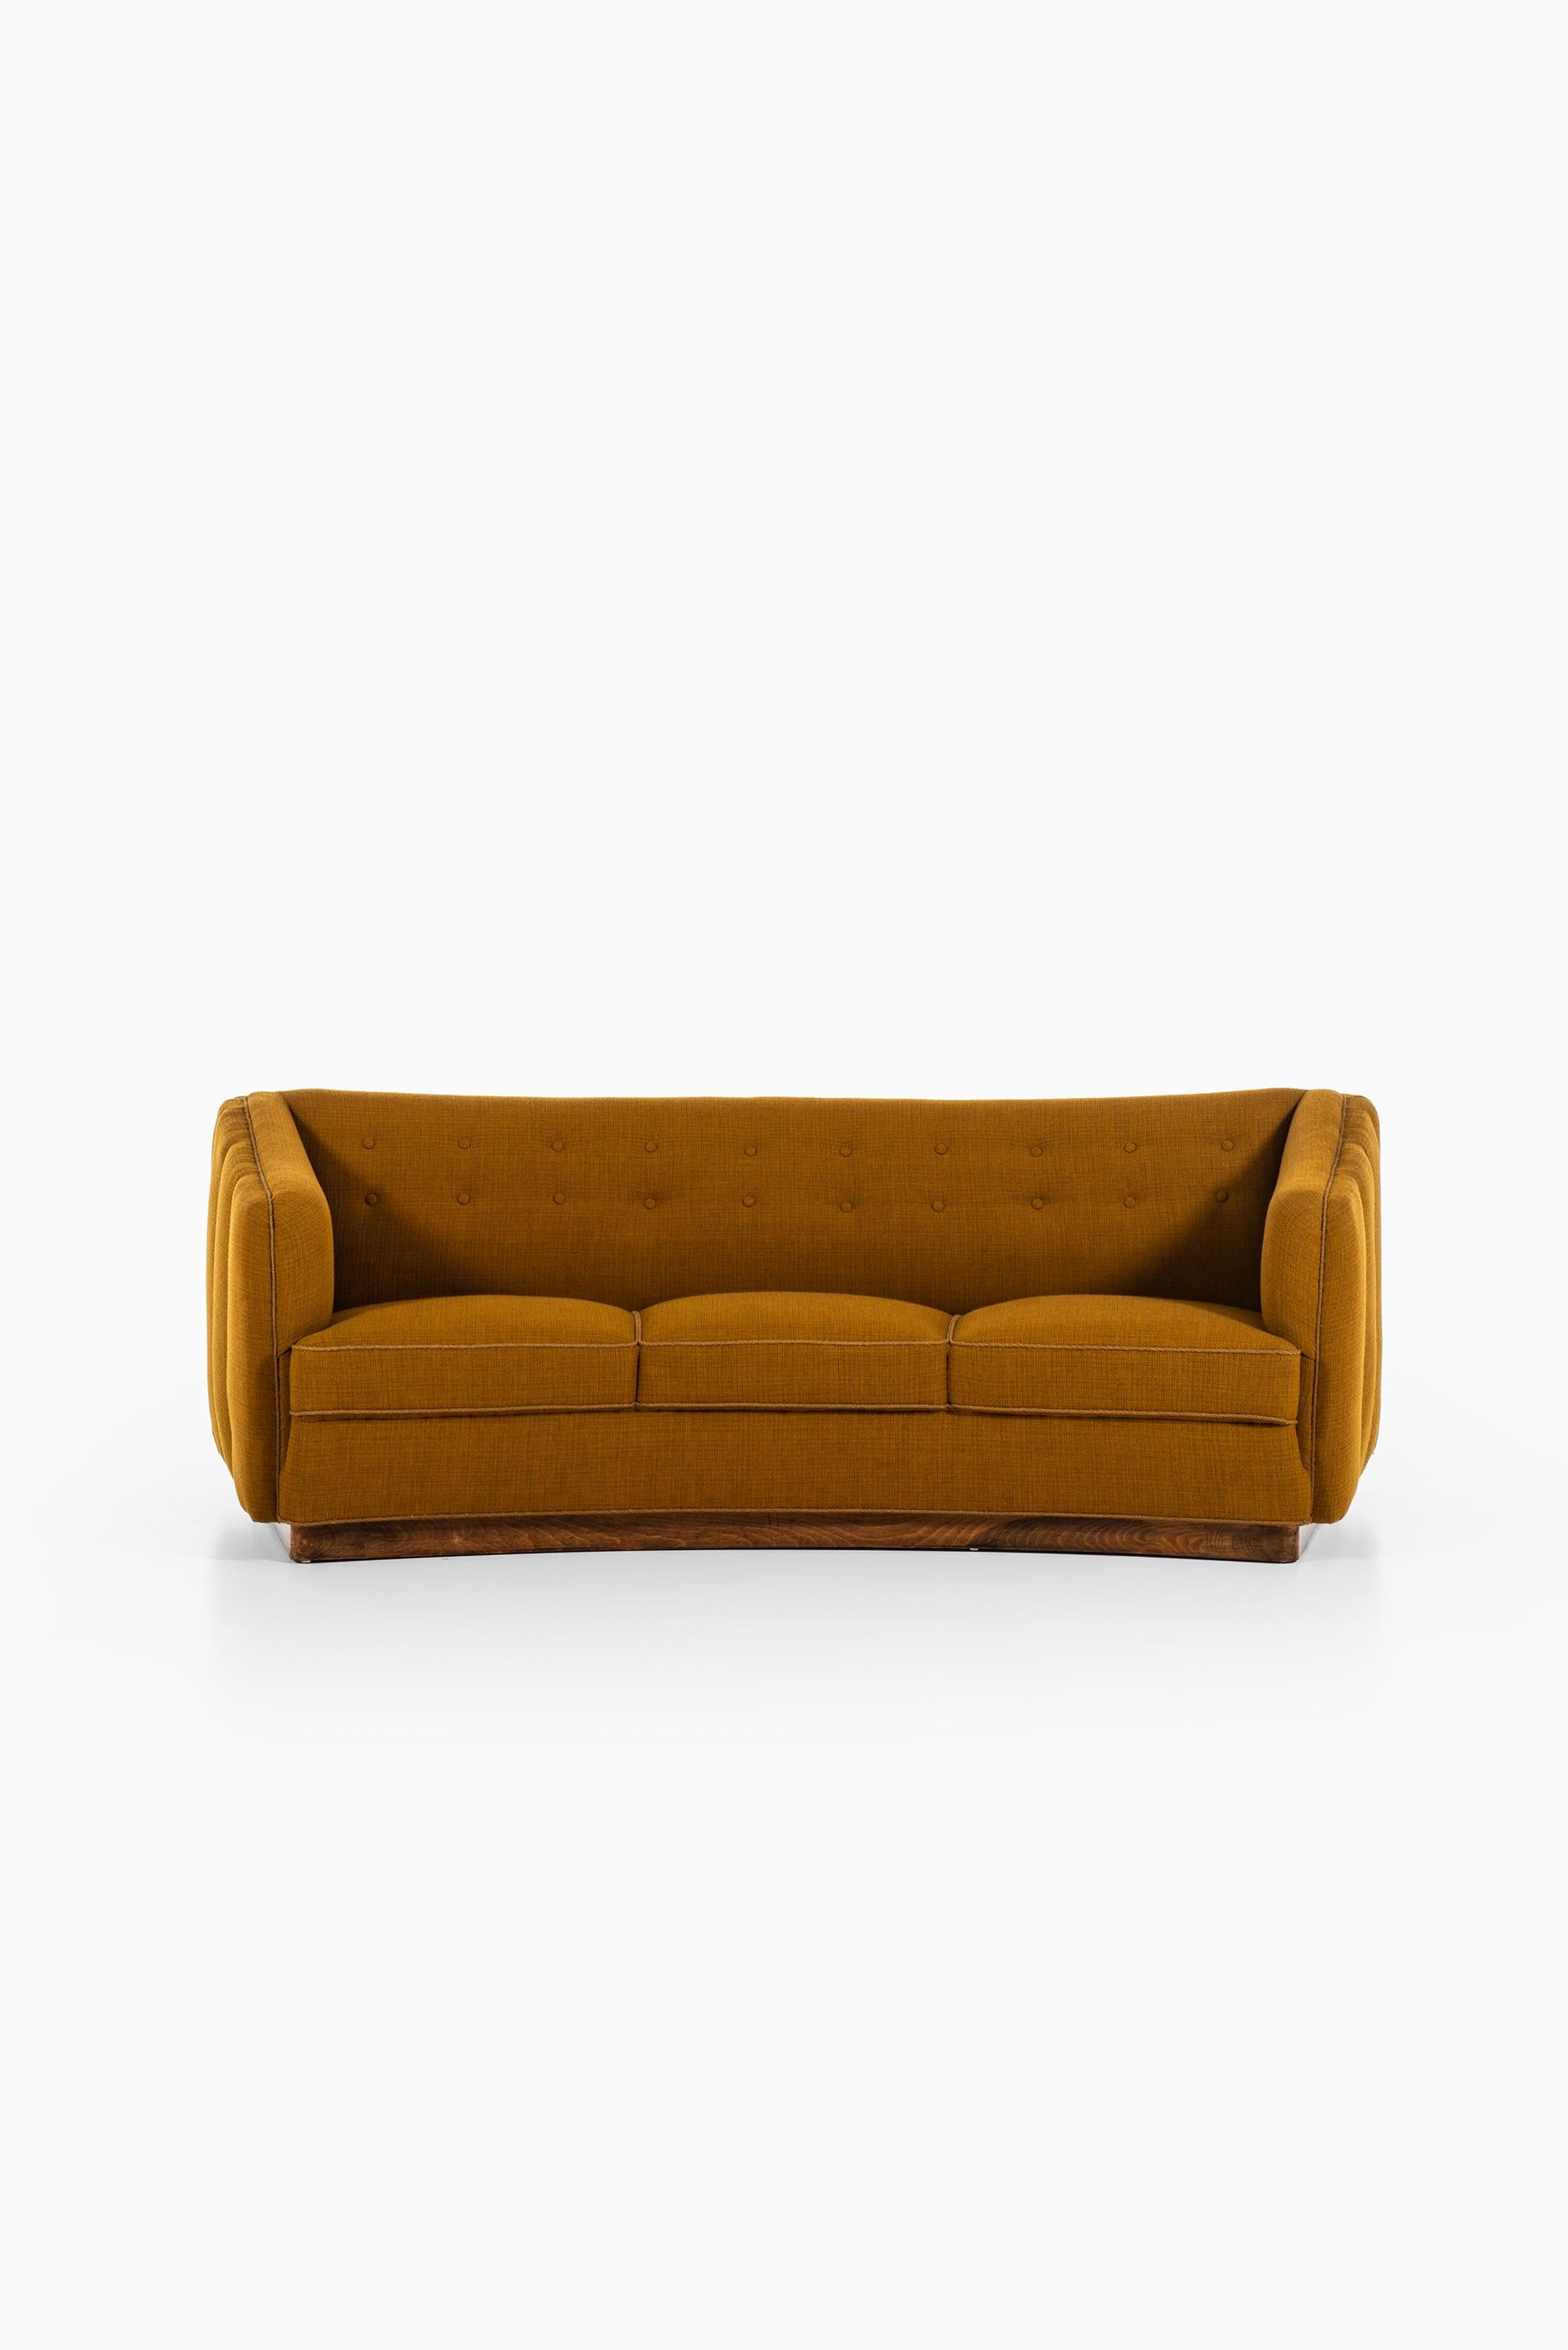 Rare sofa variation of model 1668 designed by Ole Wanscher. Produced by Fritz Hansen in Denmark.